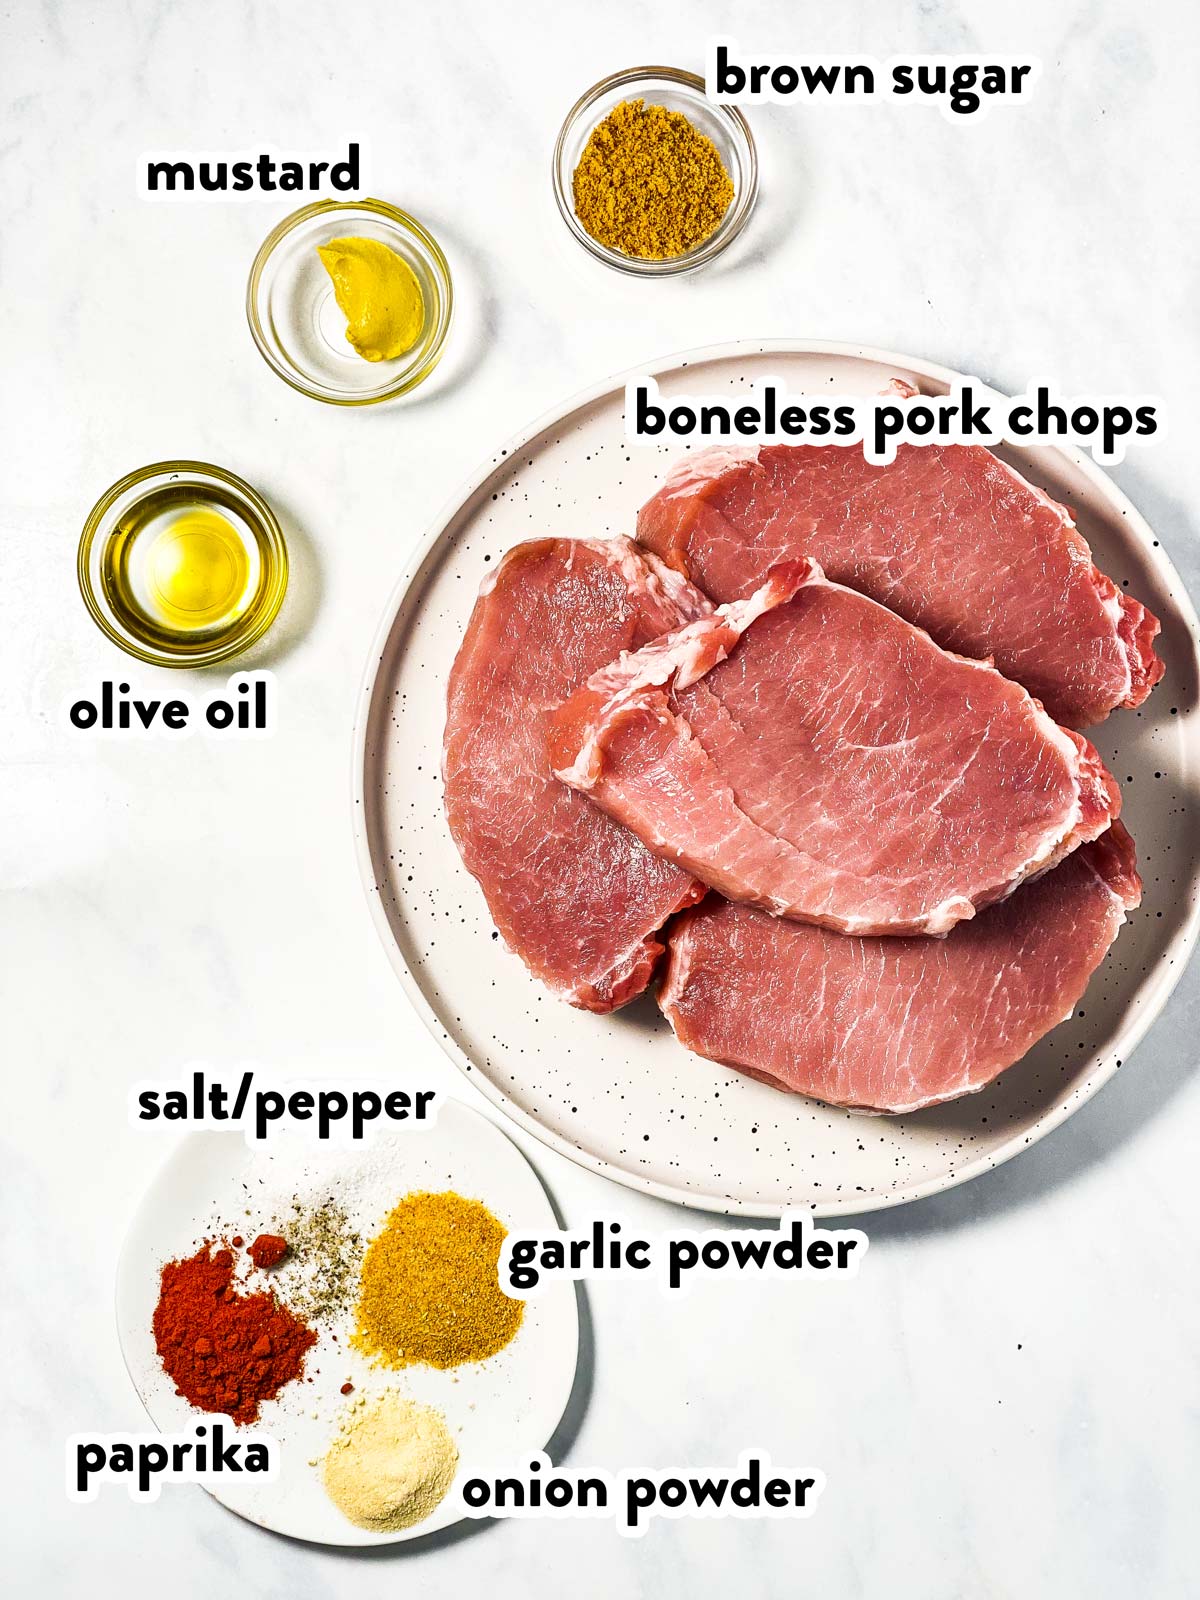 ingredients for oven baked pork chops with text labels